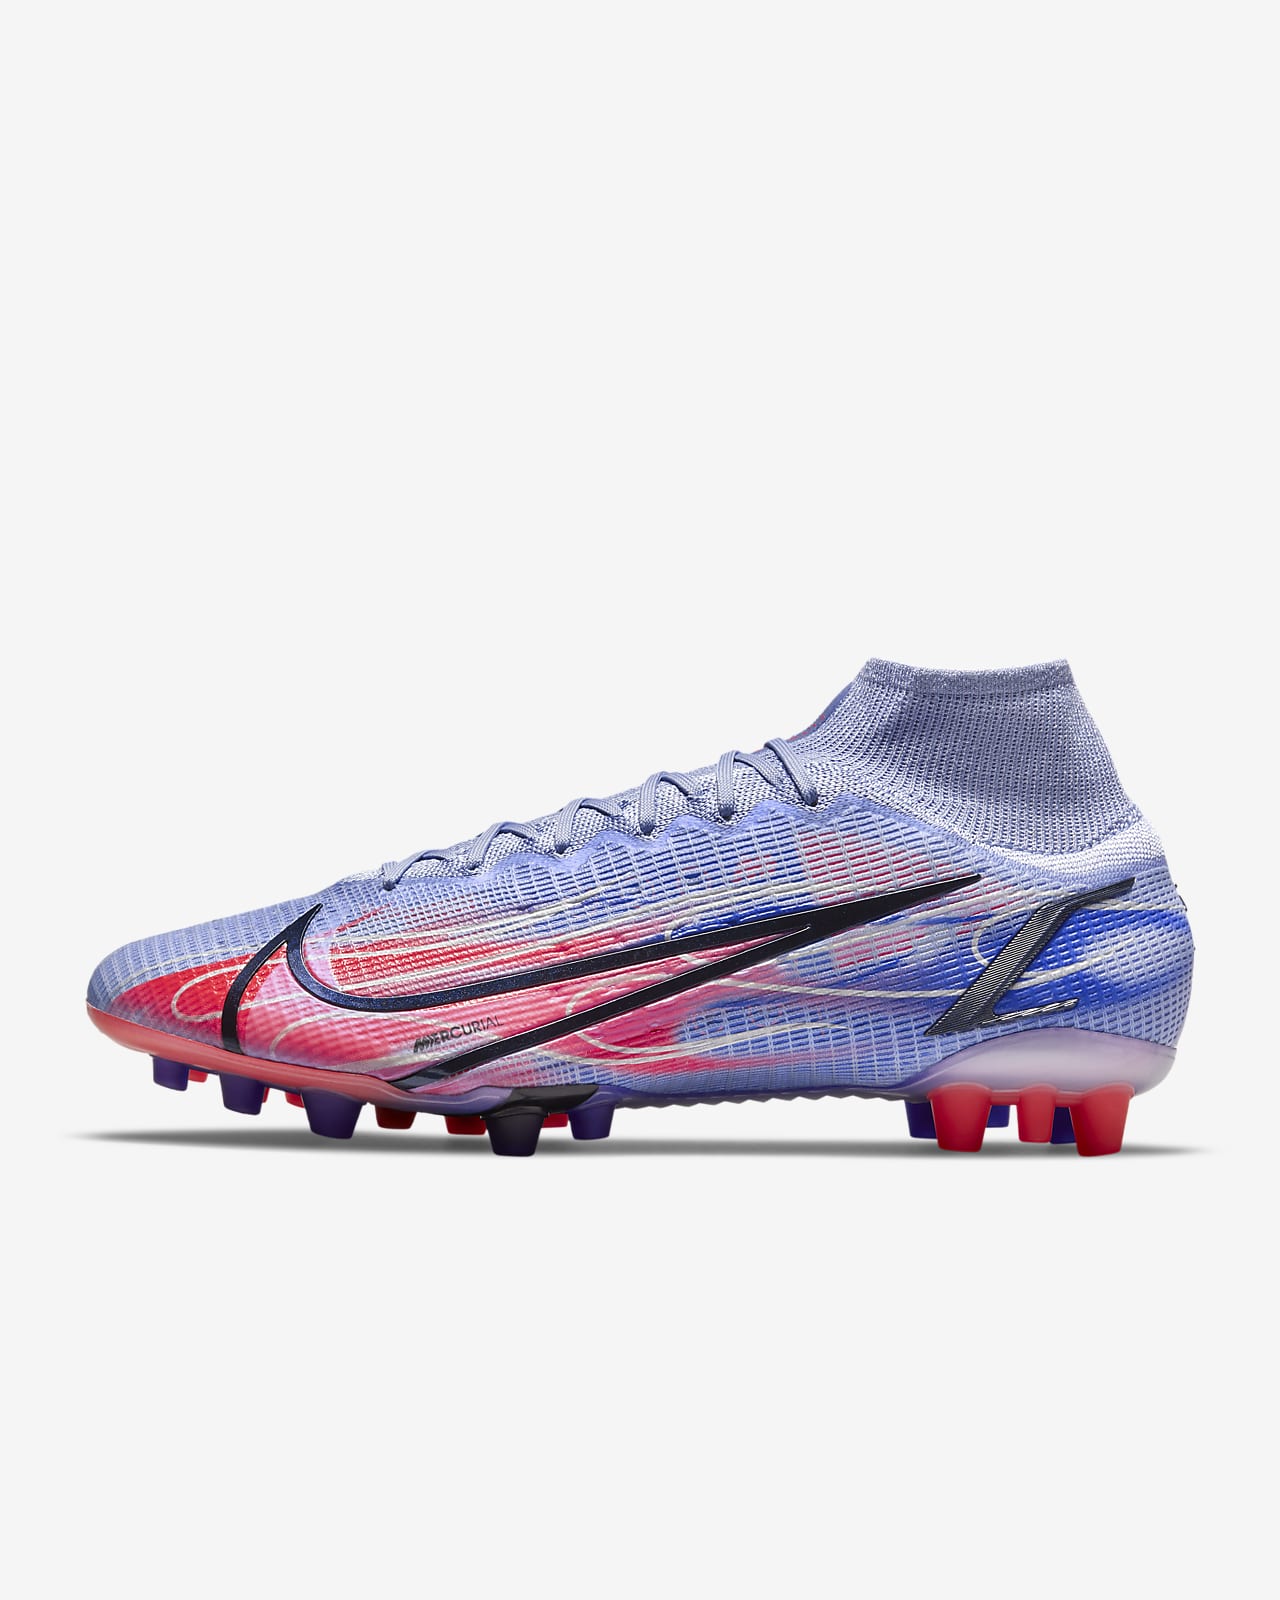 chaussures crampon foot nike,Chaussure de football à crampons pour terrain synthétique Nike Mercurial Superfly 8 Elite KM AG